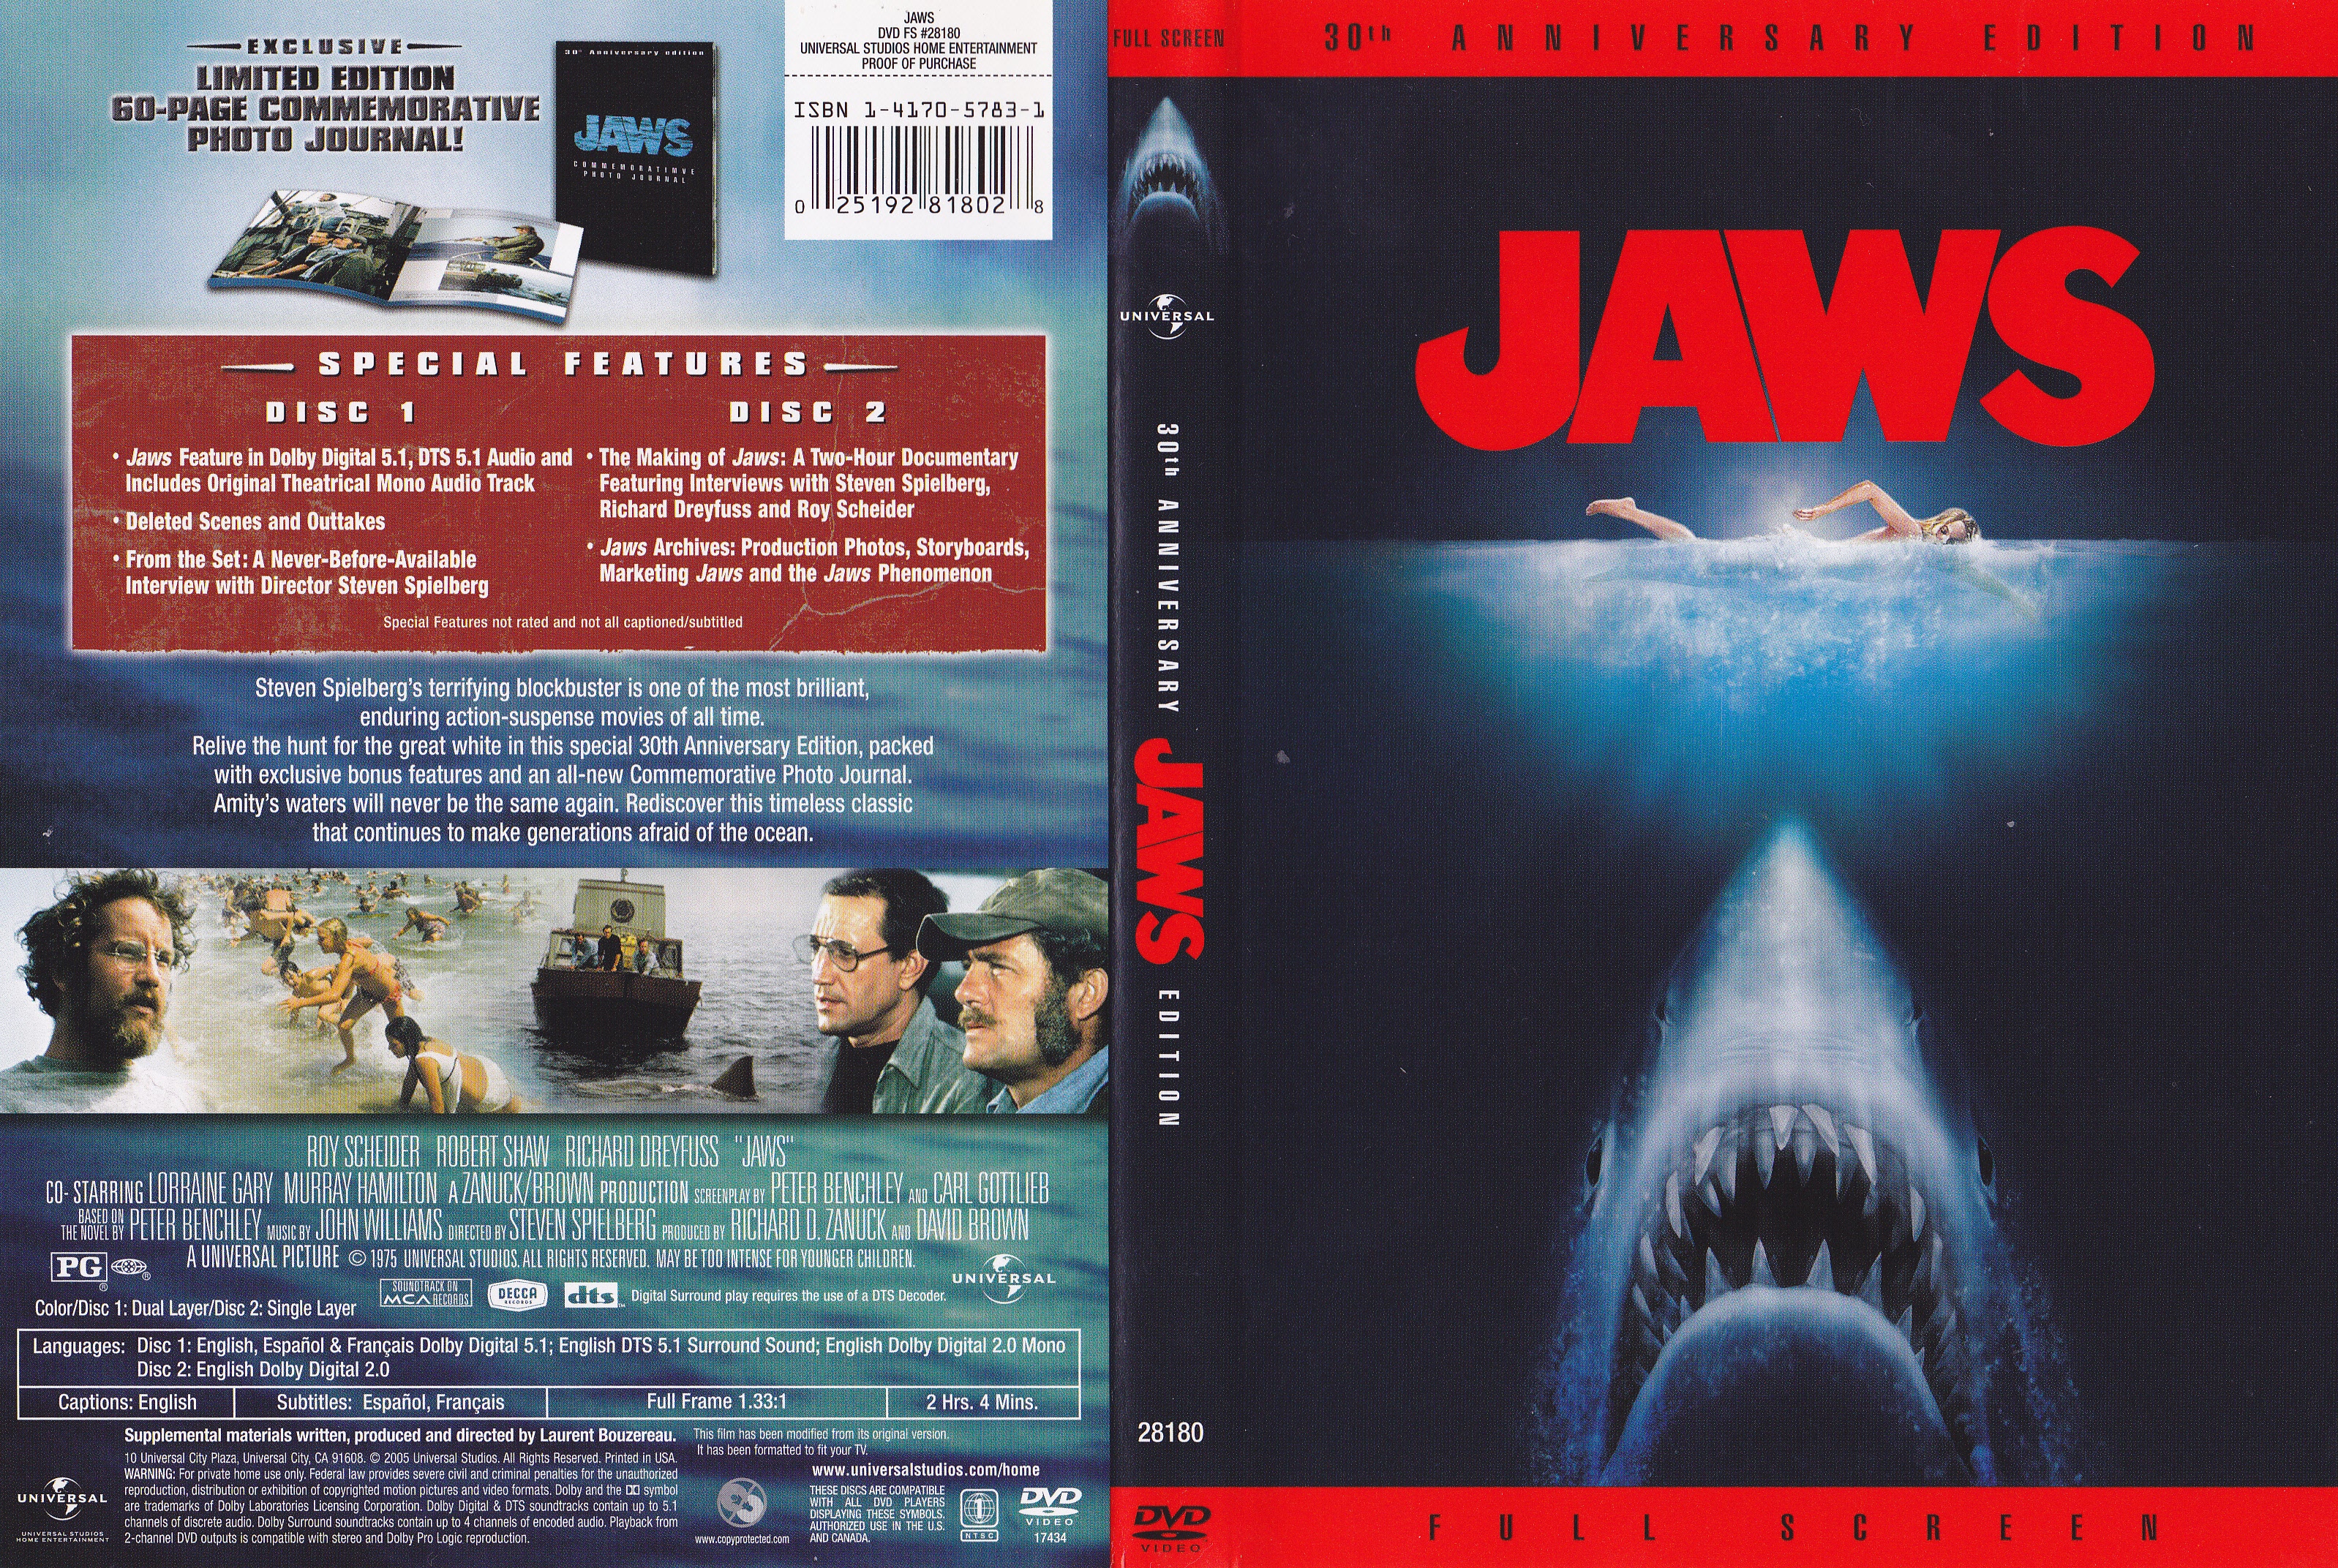 Jaquette DVD Jaws (Canadienne)